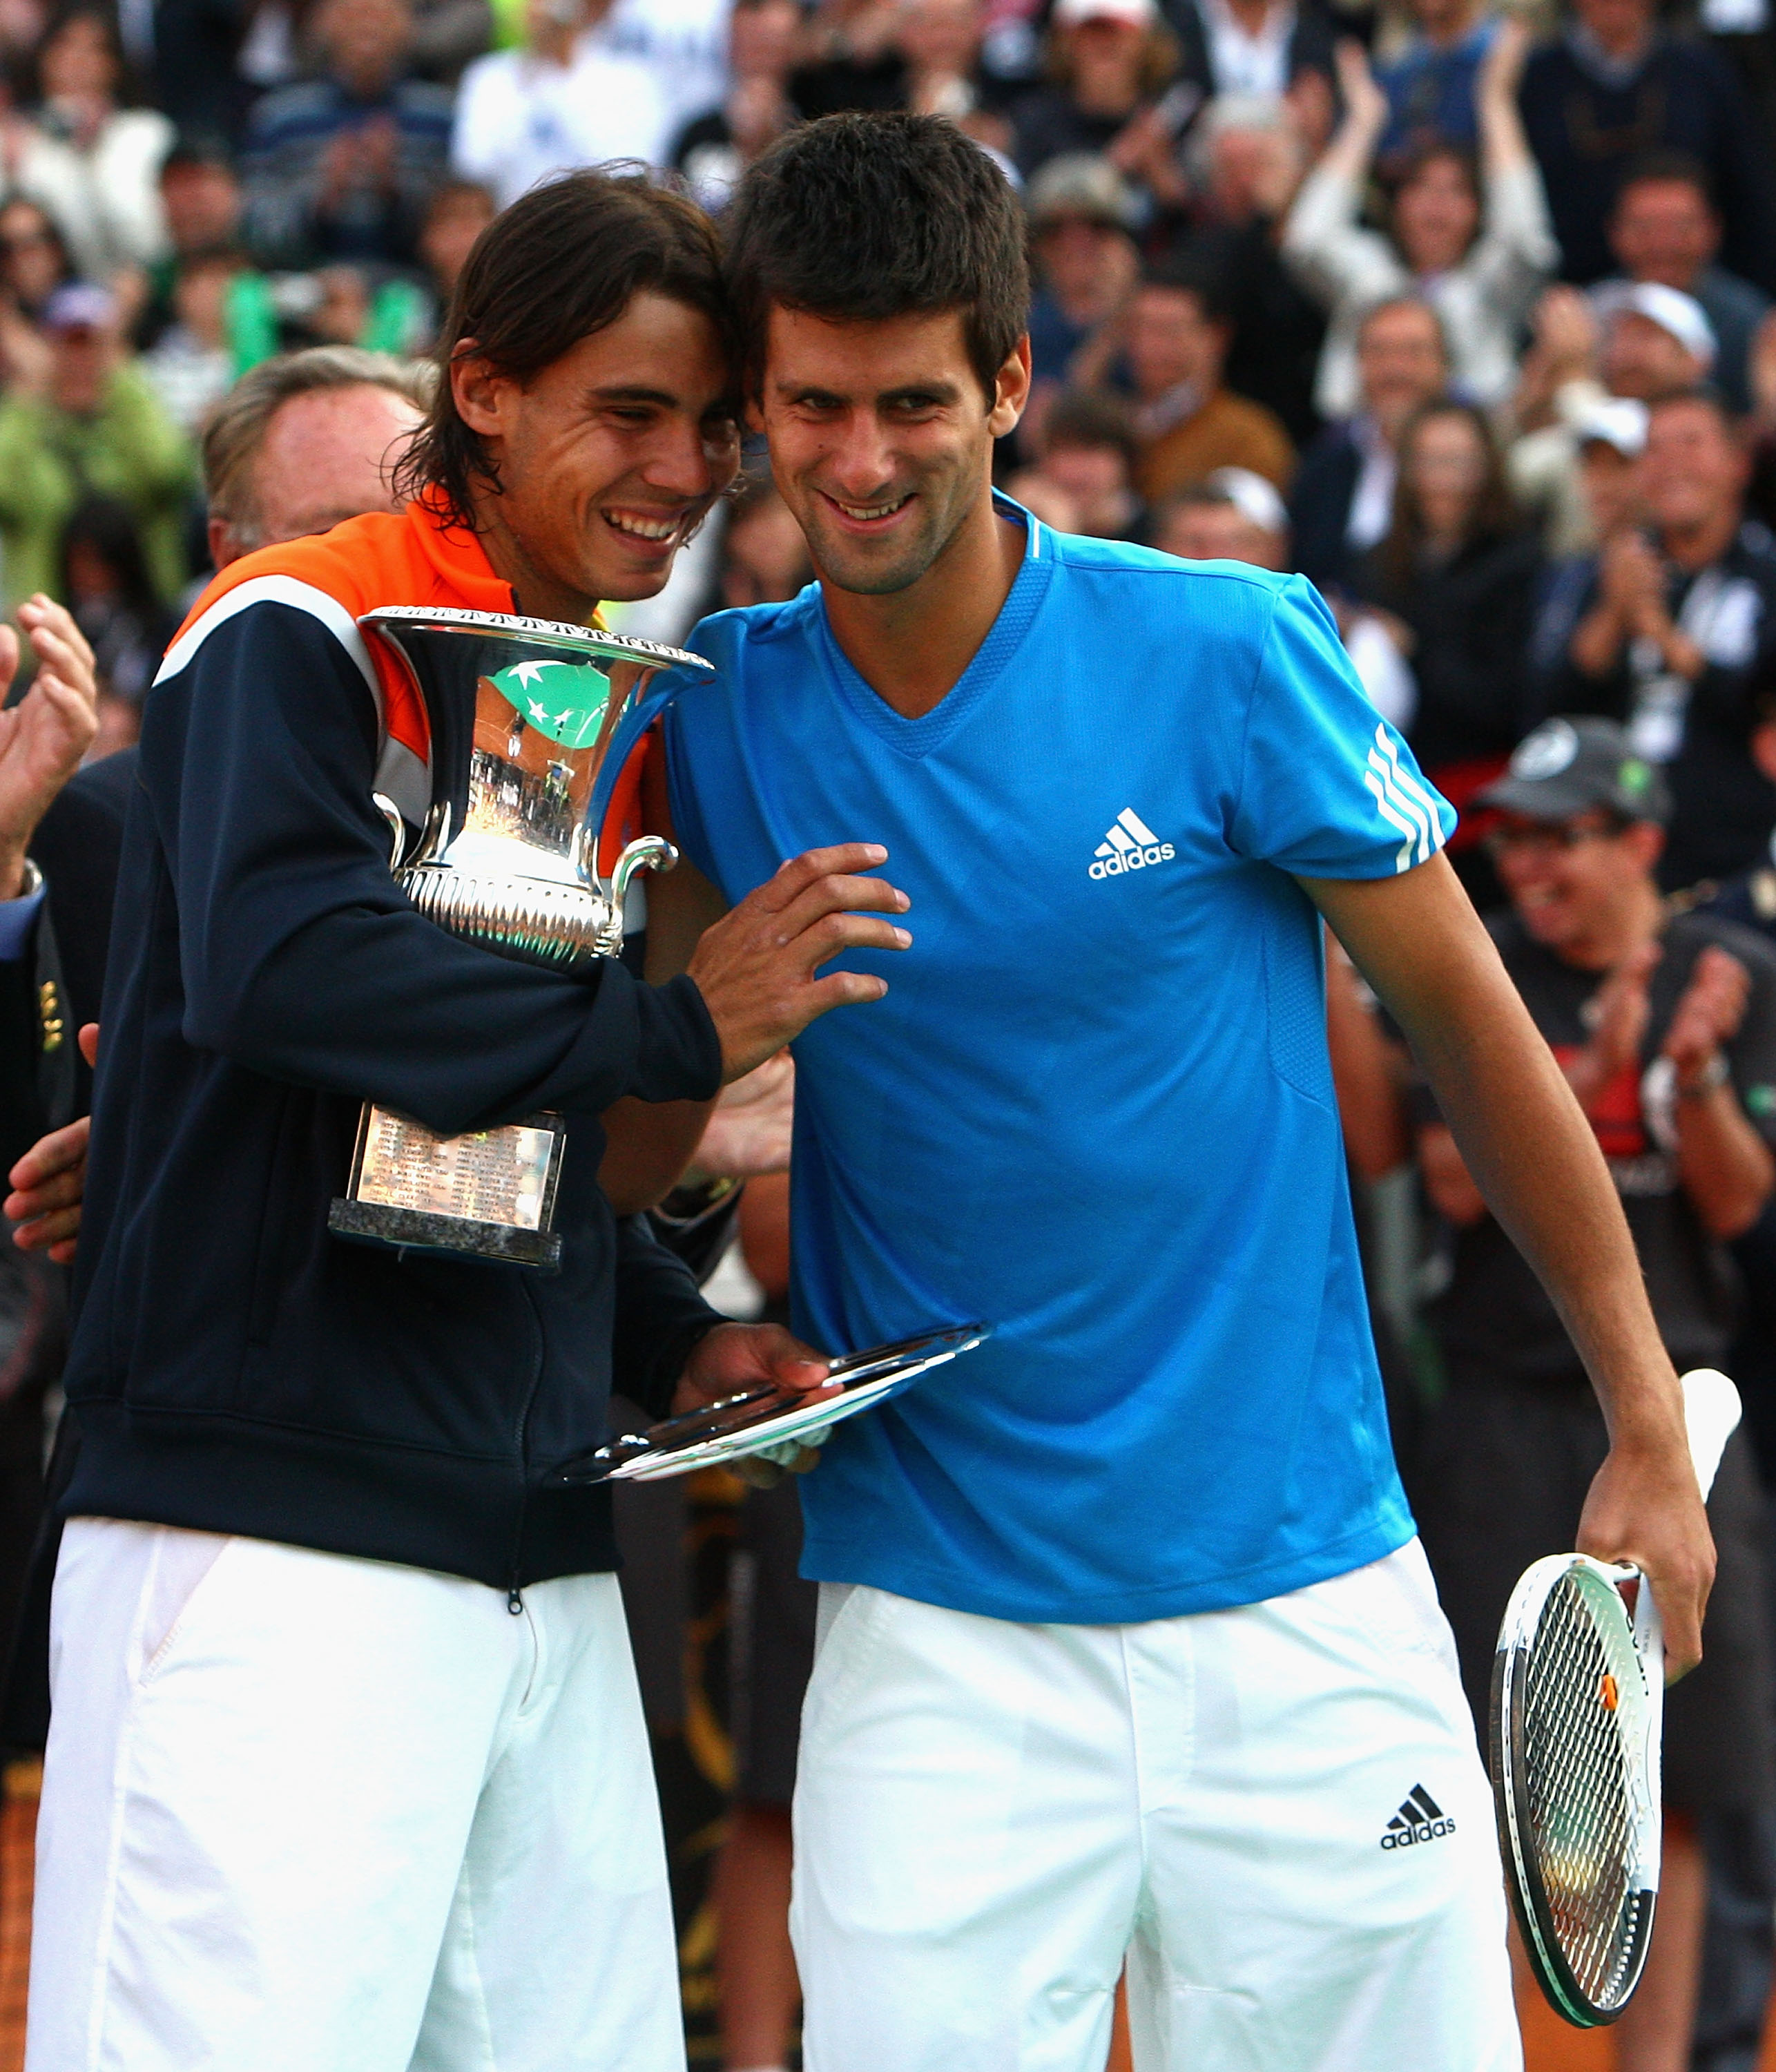 ROME - MAY 03:  Rafael Nadal (L) of Spain and Novak Djokovic (R) of Serbia share a joke after their Final match during day seven of the Foro Italico Tennis Masters on May 3, 2009 in Rome, Italy.  (Photo by Ryan Pierse/Getty Images)